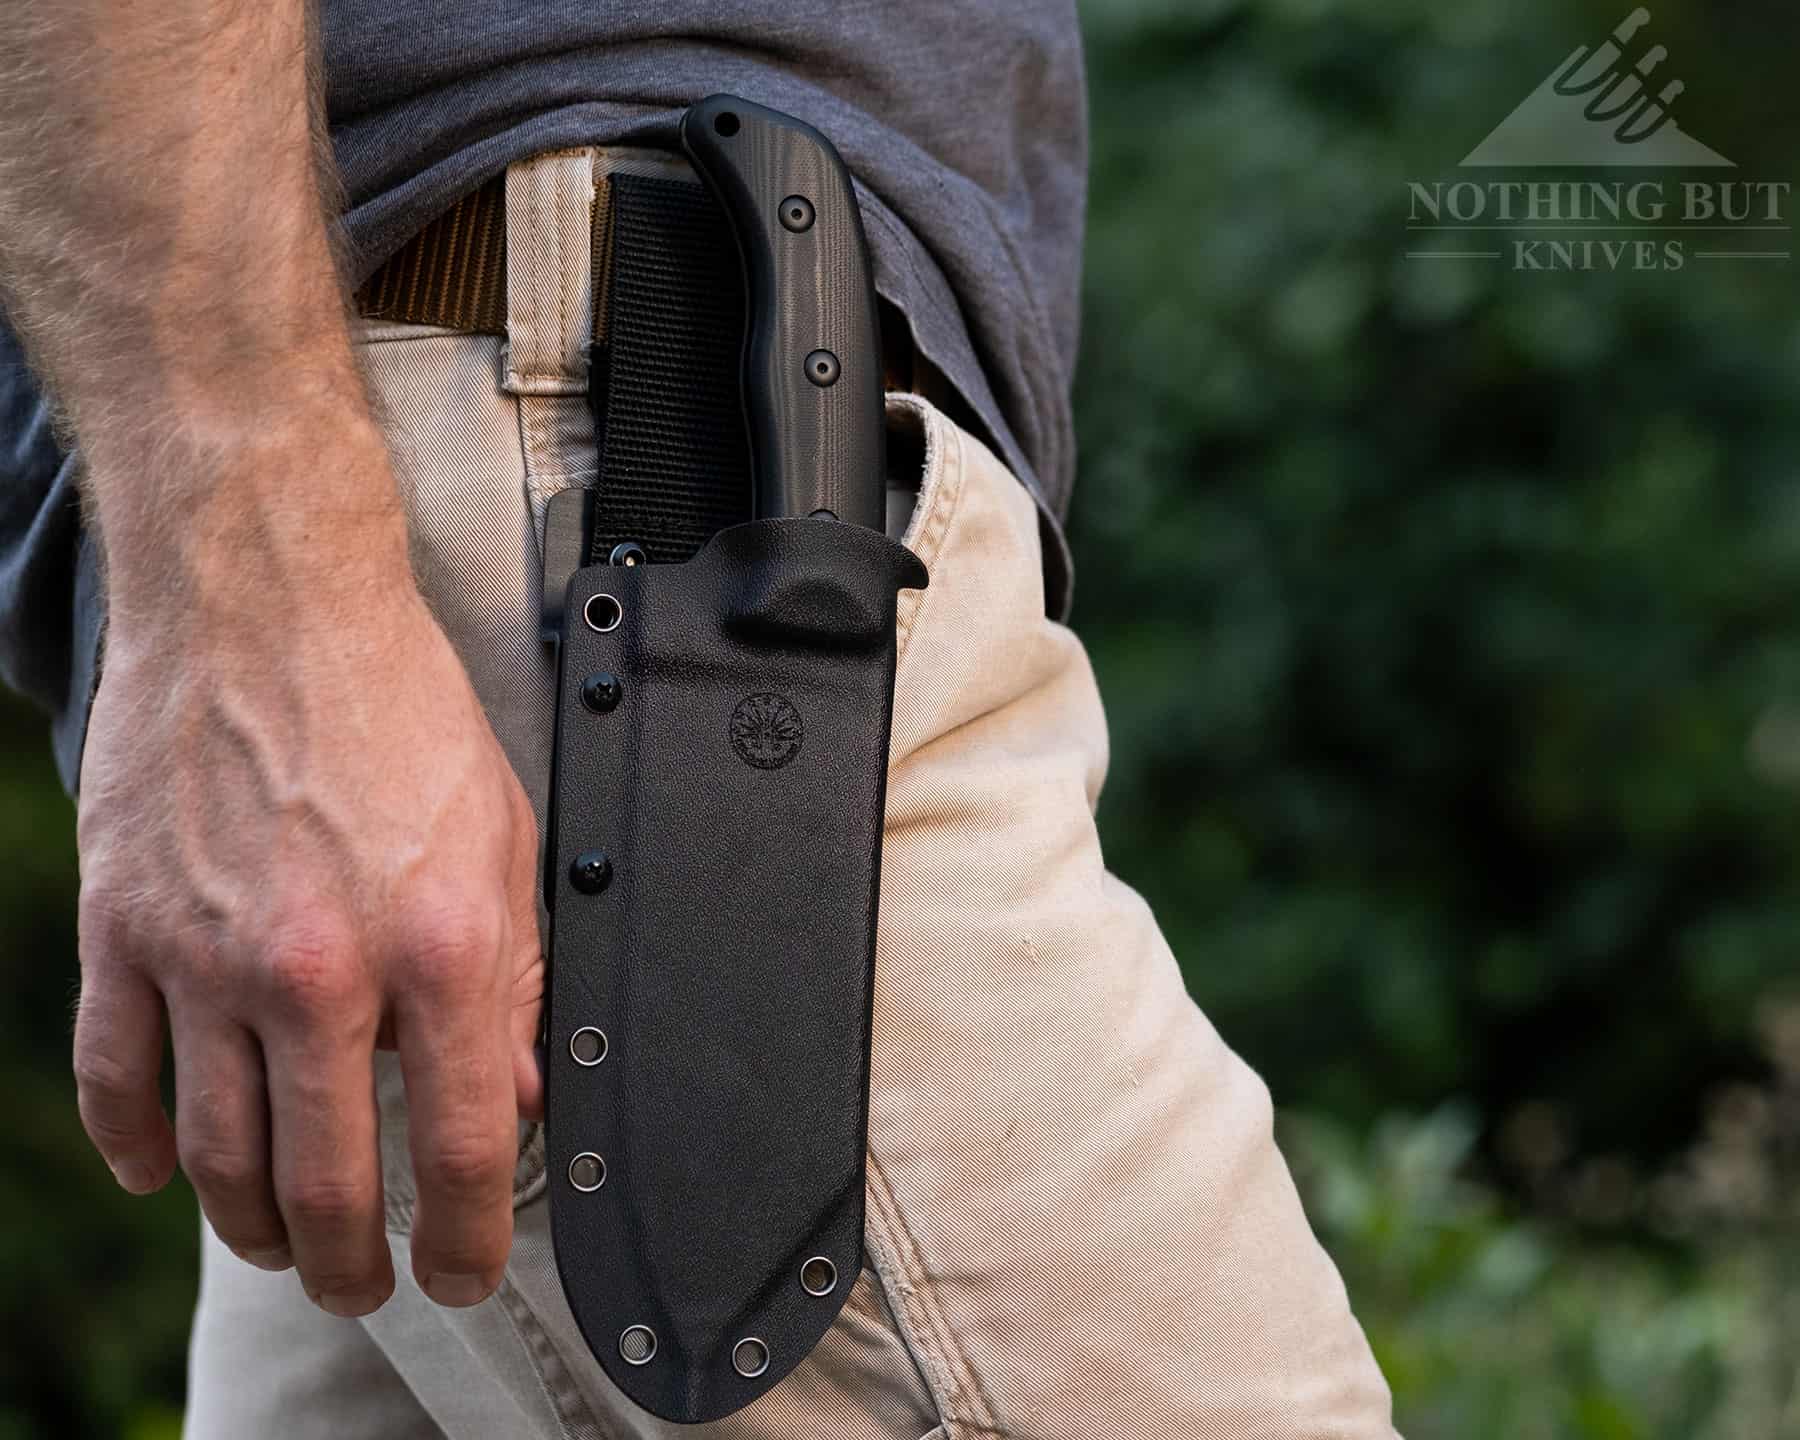 The Off-Grid Grizzly V2 ships with a comfortable kydex sheath that holds the knife securely. 